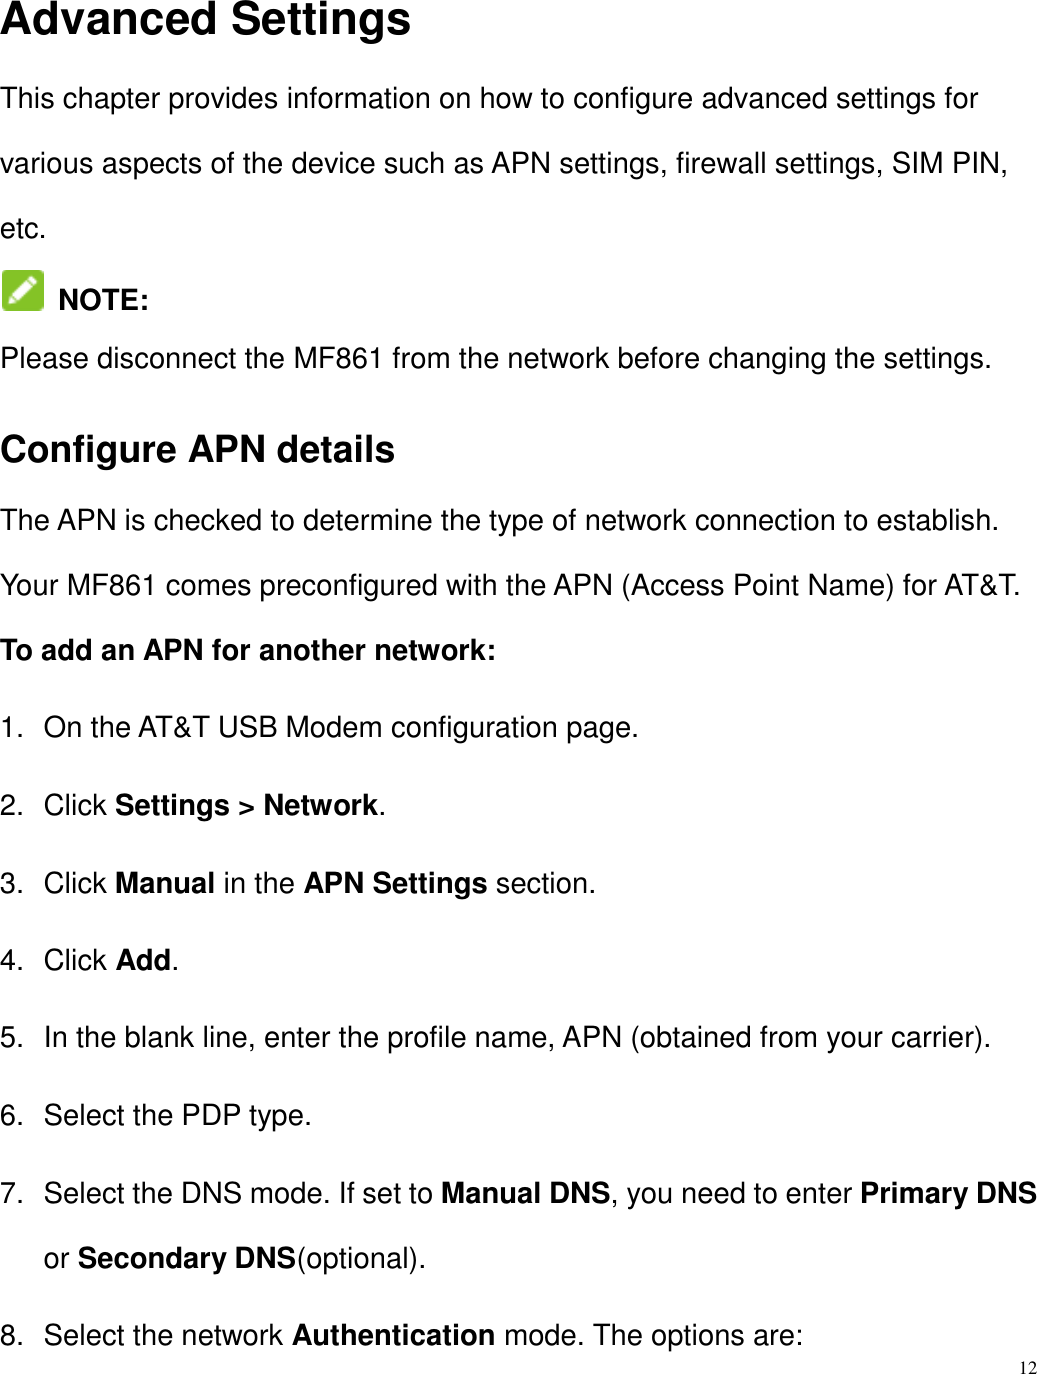 12  Advanced Settings This chapter provides information on how to configure advanced settings for various aspects of the device such as APN settings, firewall settings, SIM PIN, etc.  NOTE:  Please disconnect the MF861 from the network before changing the settings. Configure APN details The APN is checked to determine the type of network connection to establish. Your MF861 comes preconfigured with the APN (Access Point Name) for AT&amp;T. To add an APN for another network: 1.  On the AT&amp;T USB Modem configuration page. 2.  Click Settings &gt; Network. 3.  Click Manual in the APN Settings section. 4.  Click Add. 5.  In the blank line, enter the profile name, APN (obtained from your carrier). 6.  Select the PDP type. 7.  Select the DNS mode. If set to Manual DNS, you need to enter Primary DNS or Secondary DNS(optional).   8.  Select the network Authentication mode. The options are: 